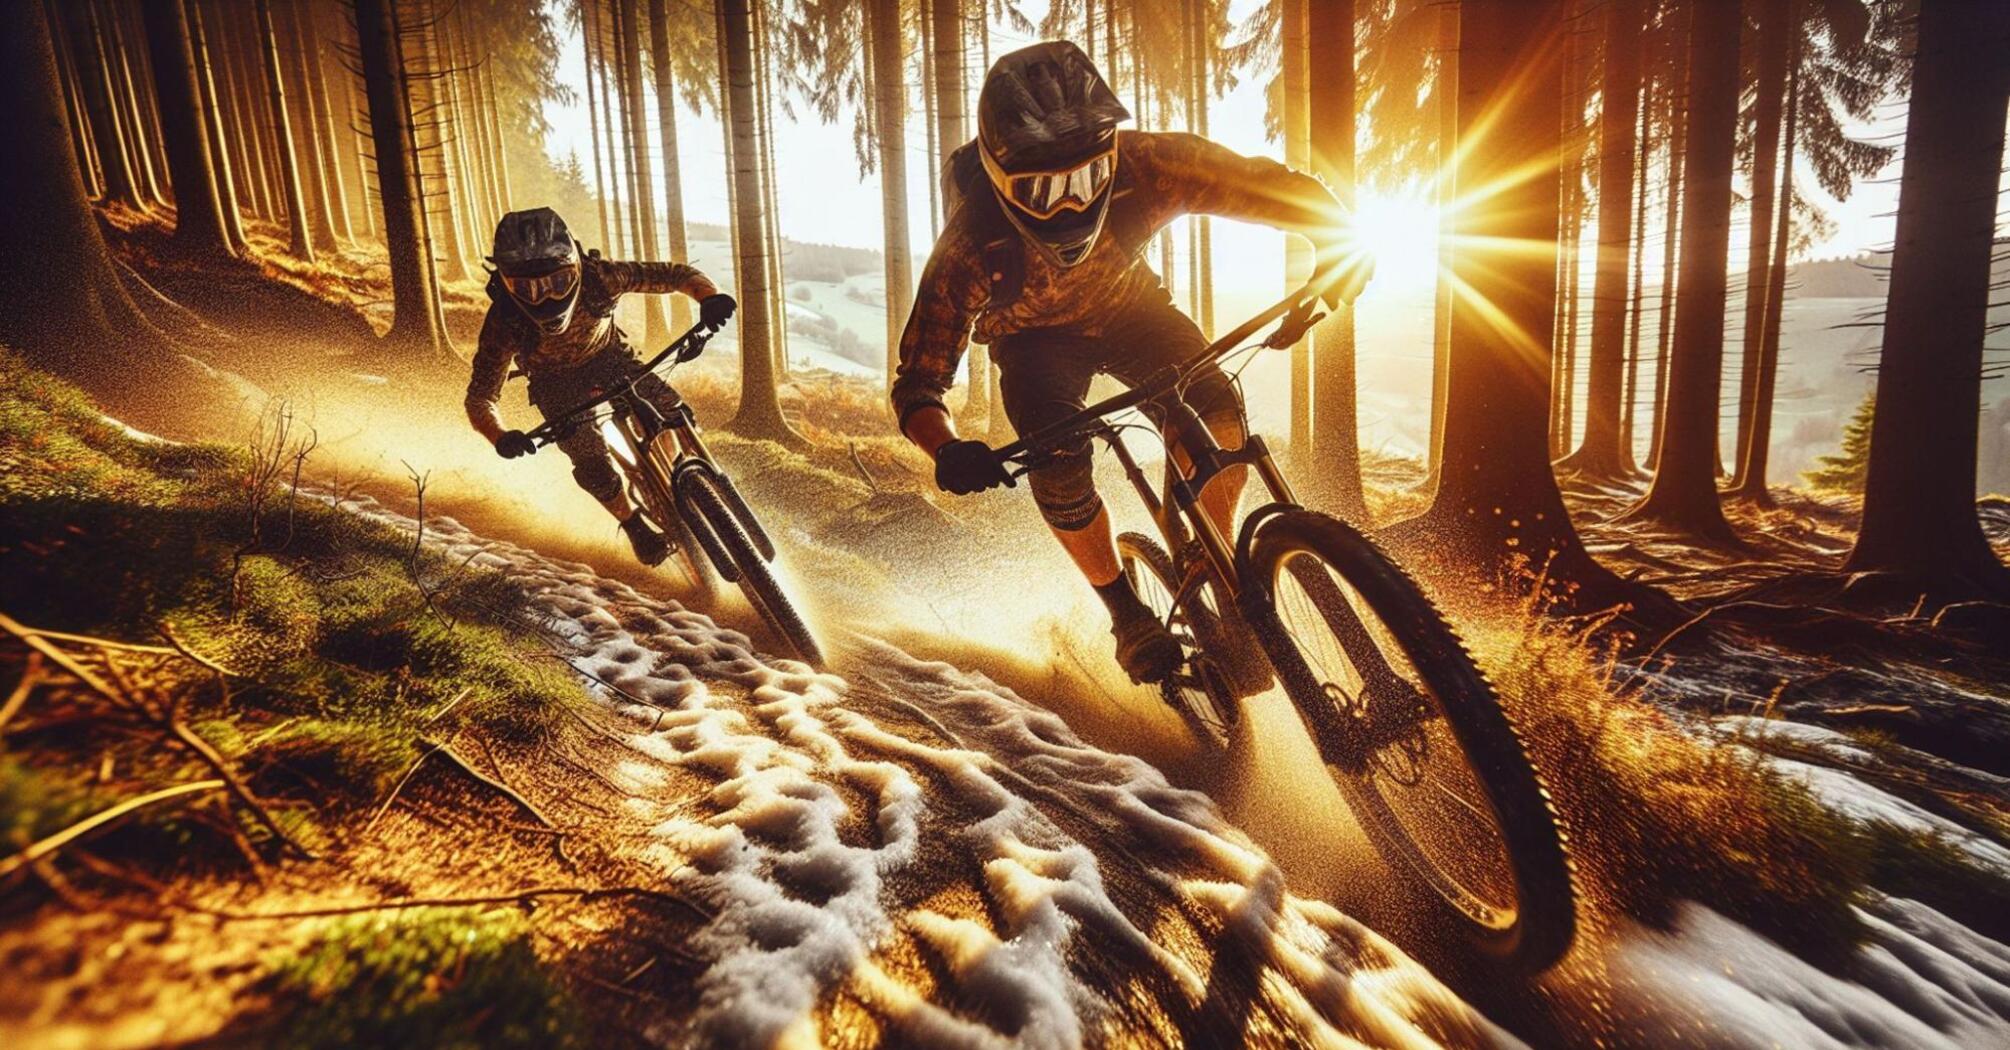 Bike racing in the dense forest